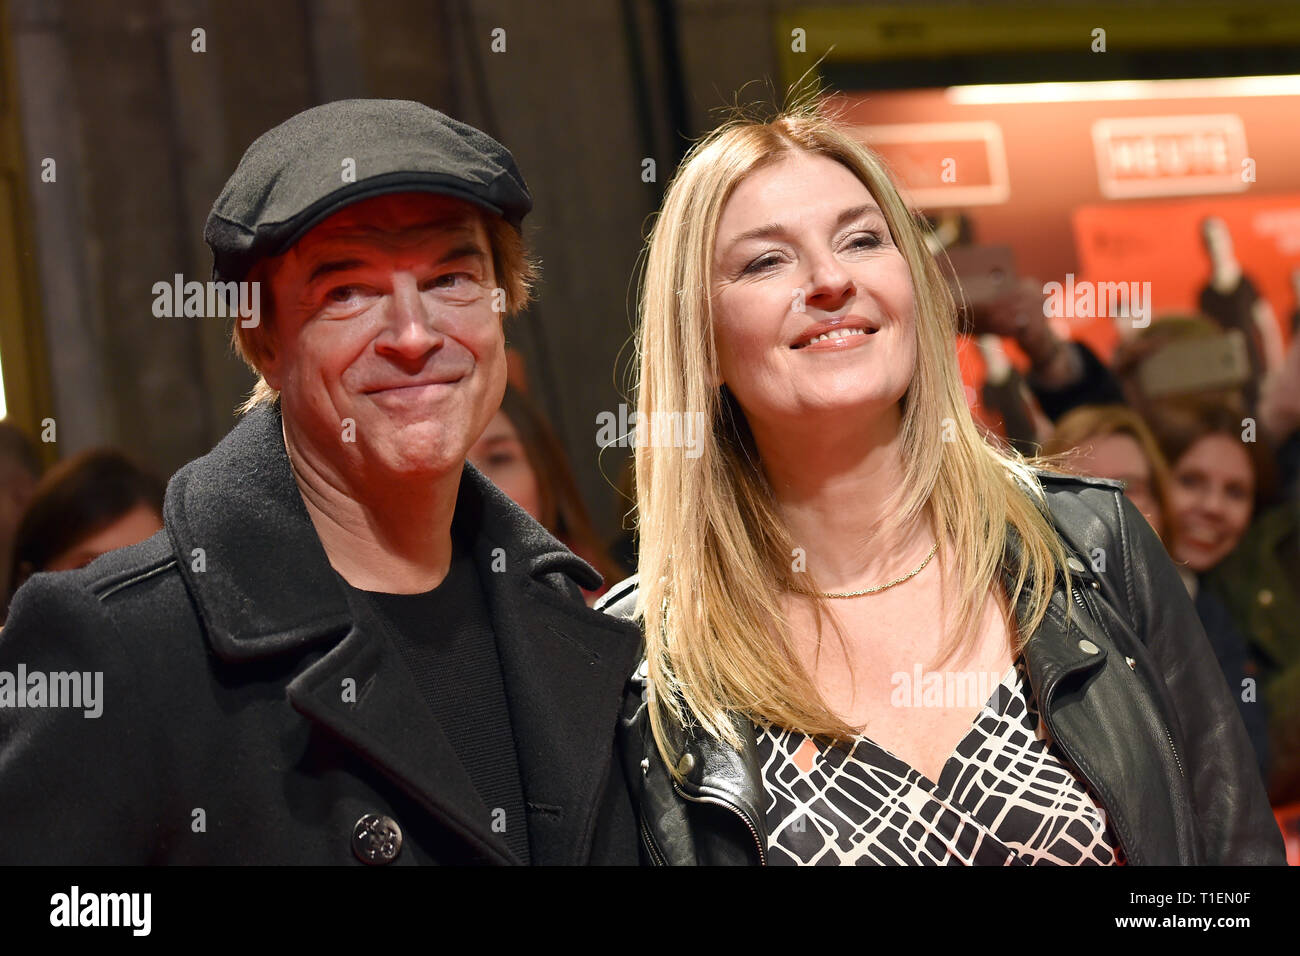 Essen, Germany. 26th Mar, 2019. Campino (Andreas Frege), singer of the band  "Die Toten Hosen", and director Cordula Kablitz-Post come to the premiere  of the documentary film "Weil du nur einmal leben -